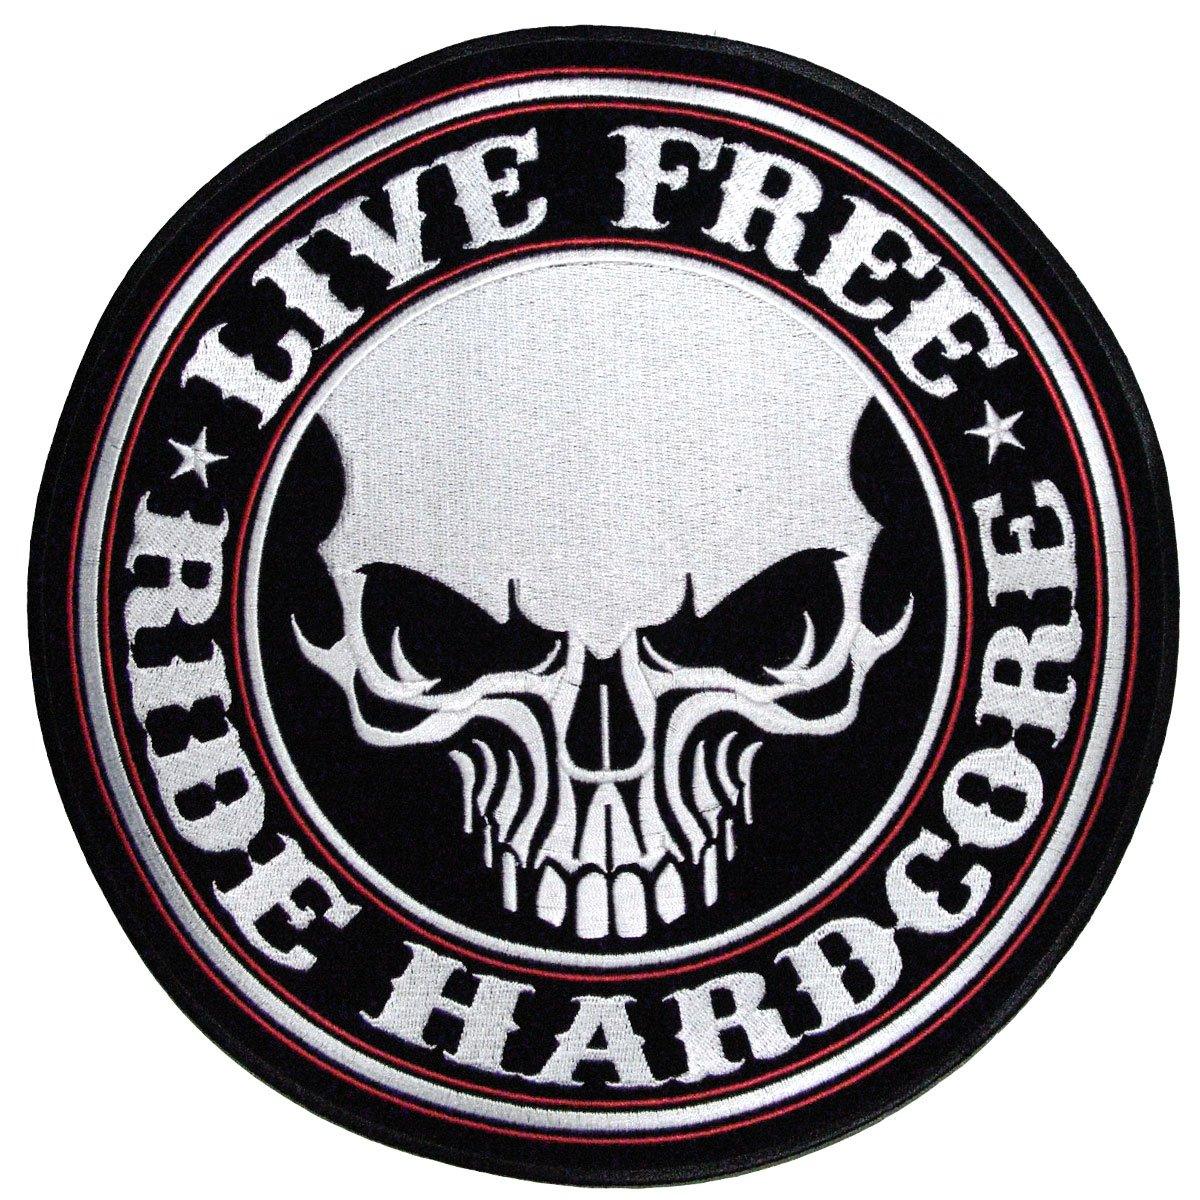 Hot Leathers Live Free Ride Hardcore Skull 10" X 10" Patch - American Legend Rider